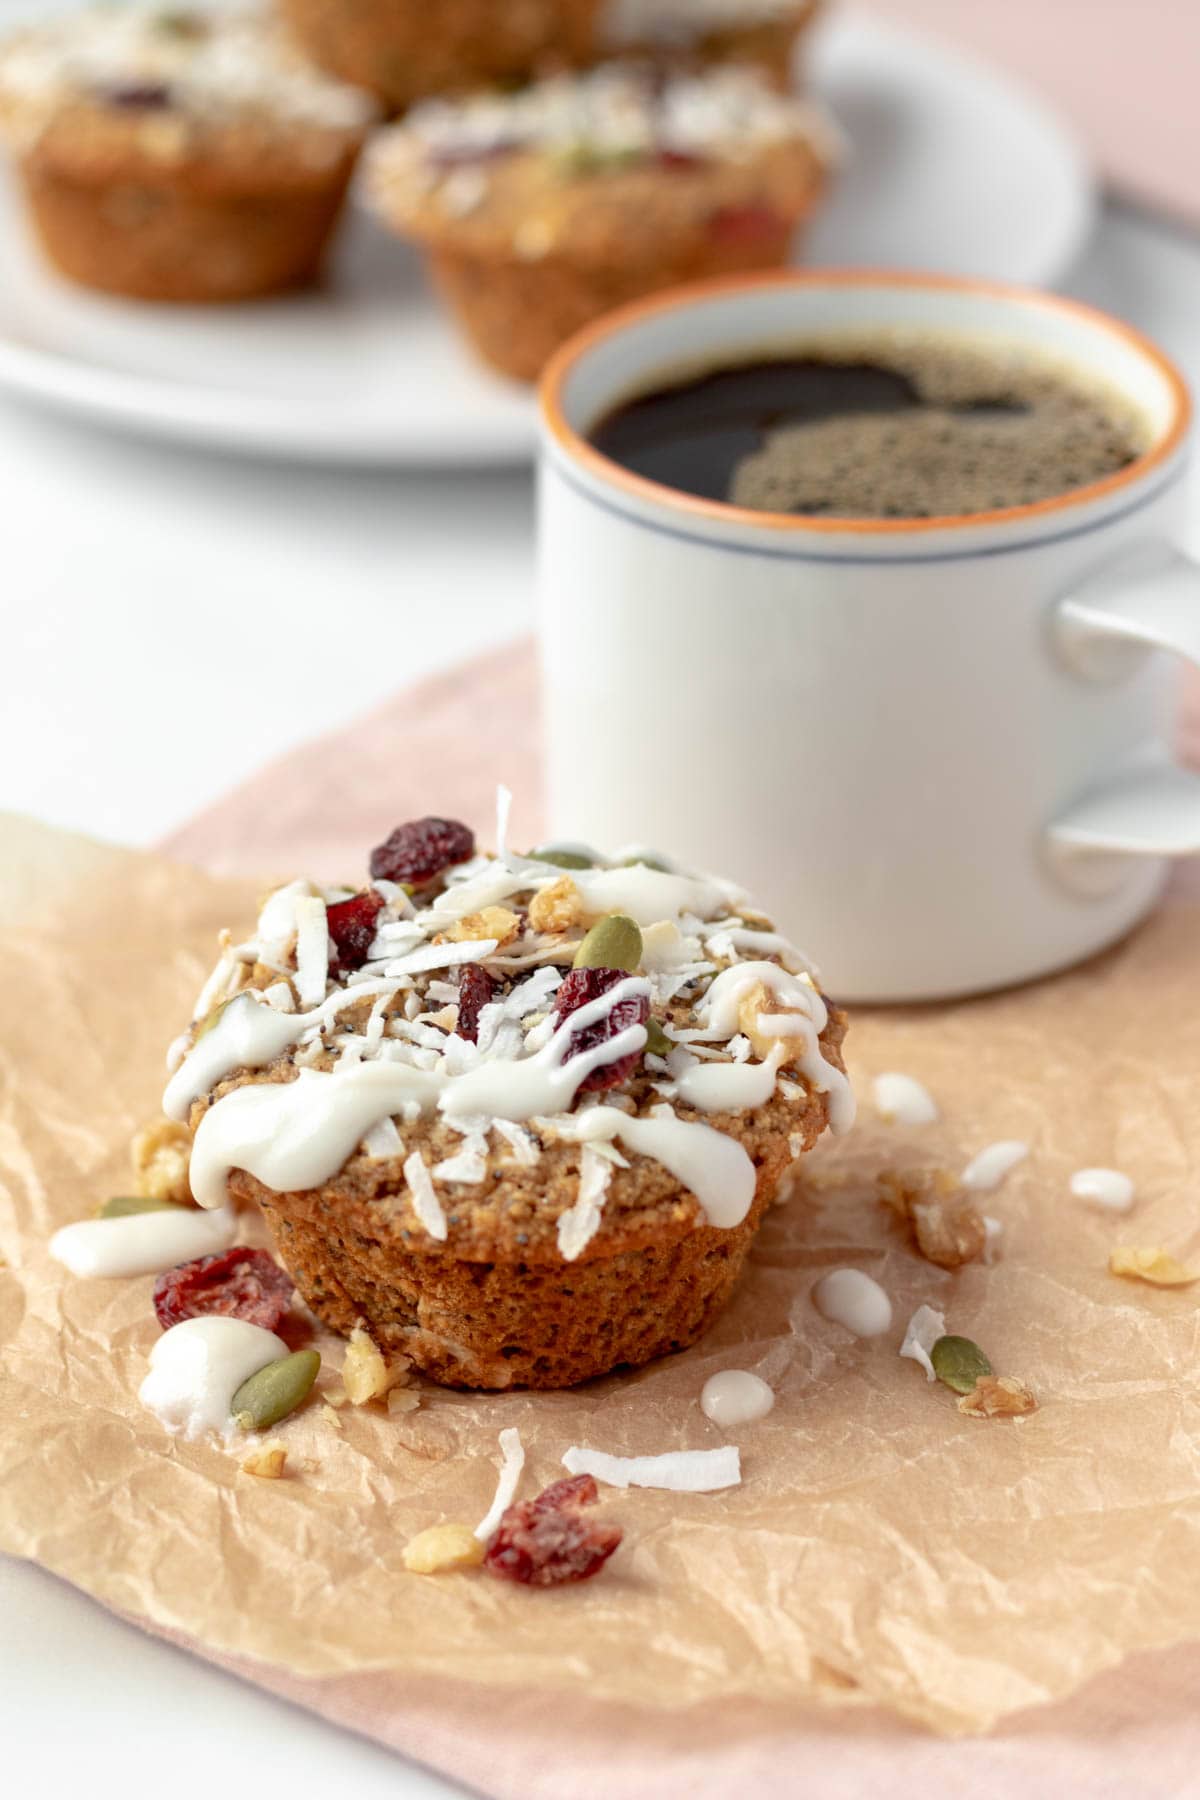 A decorated muffin on parchment paper next to a mug of coffee.